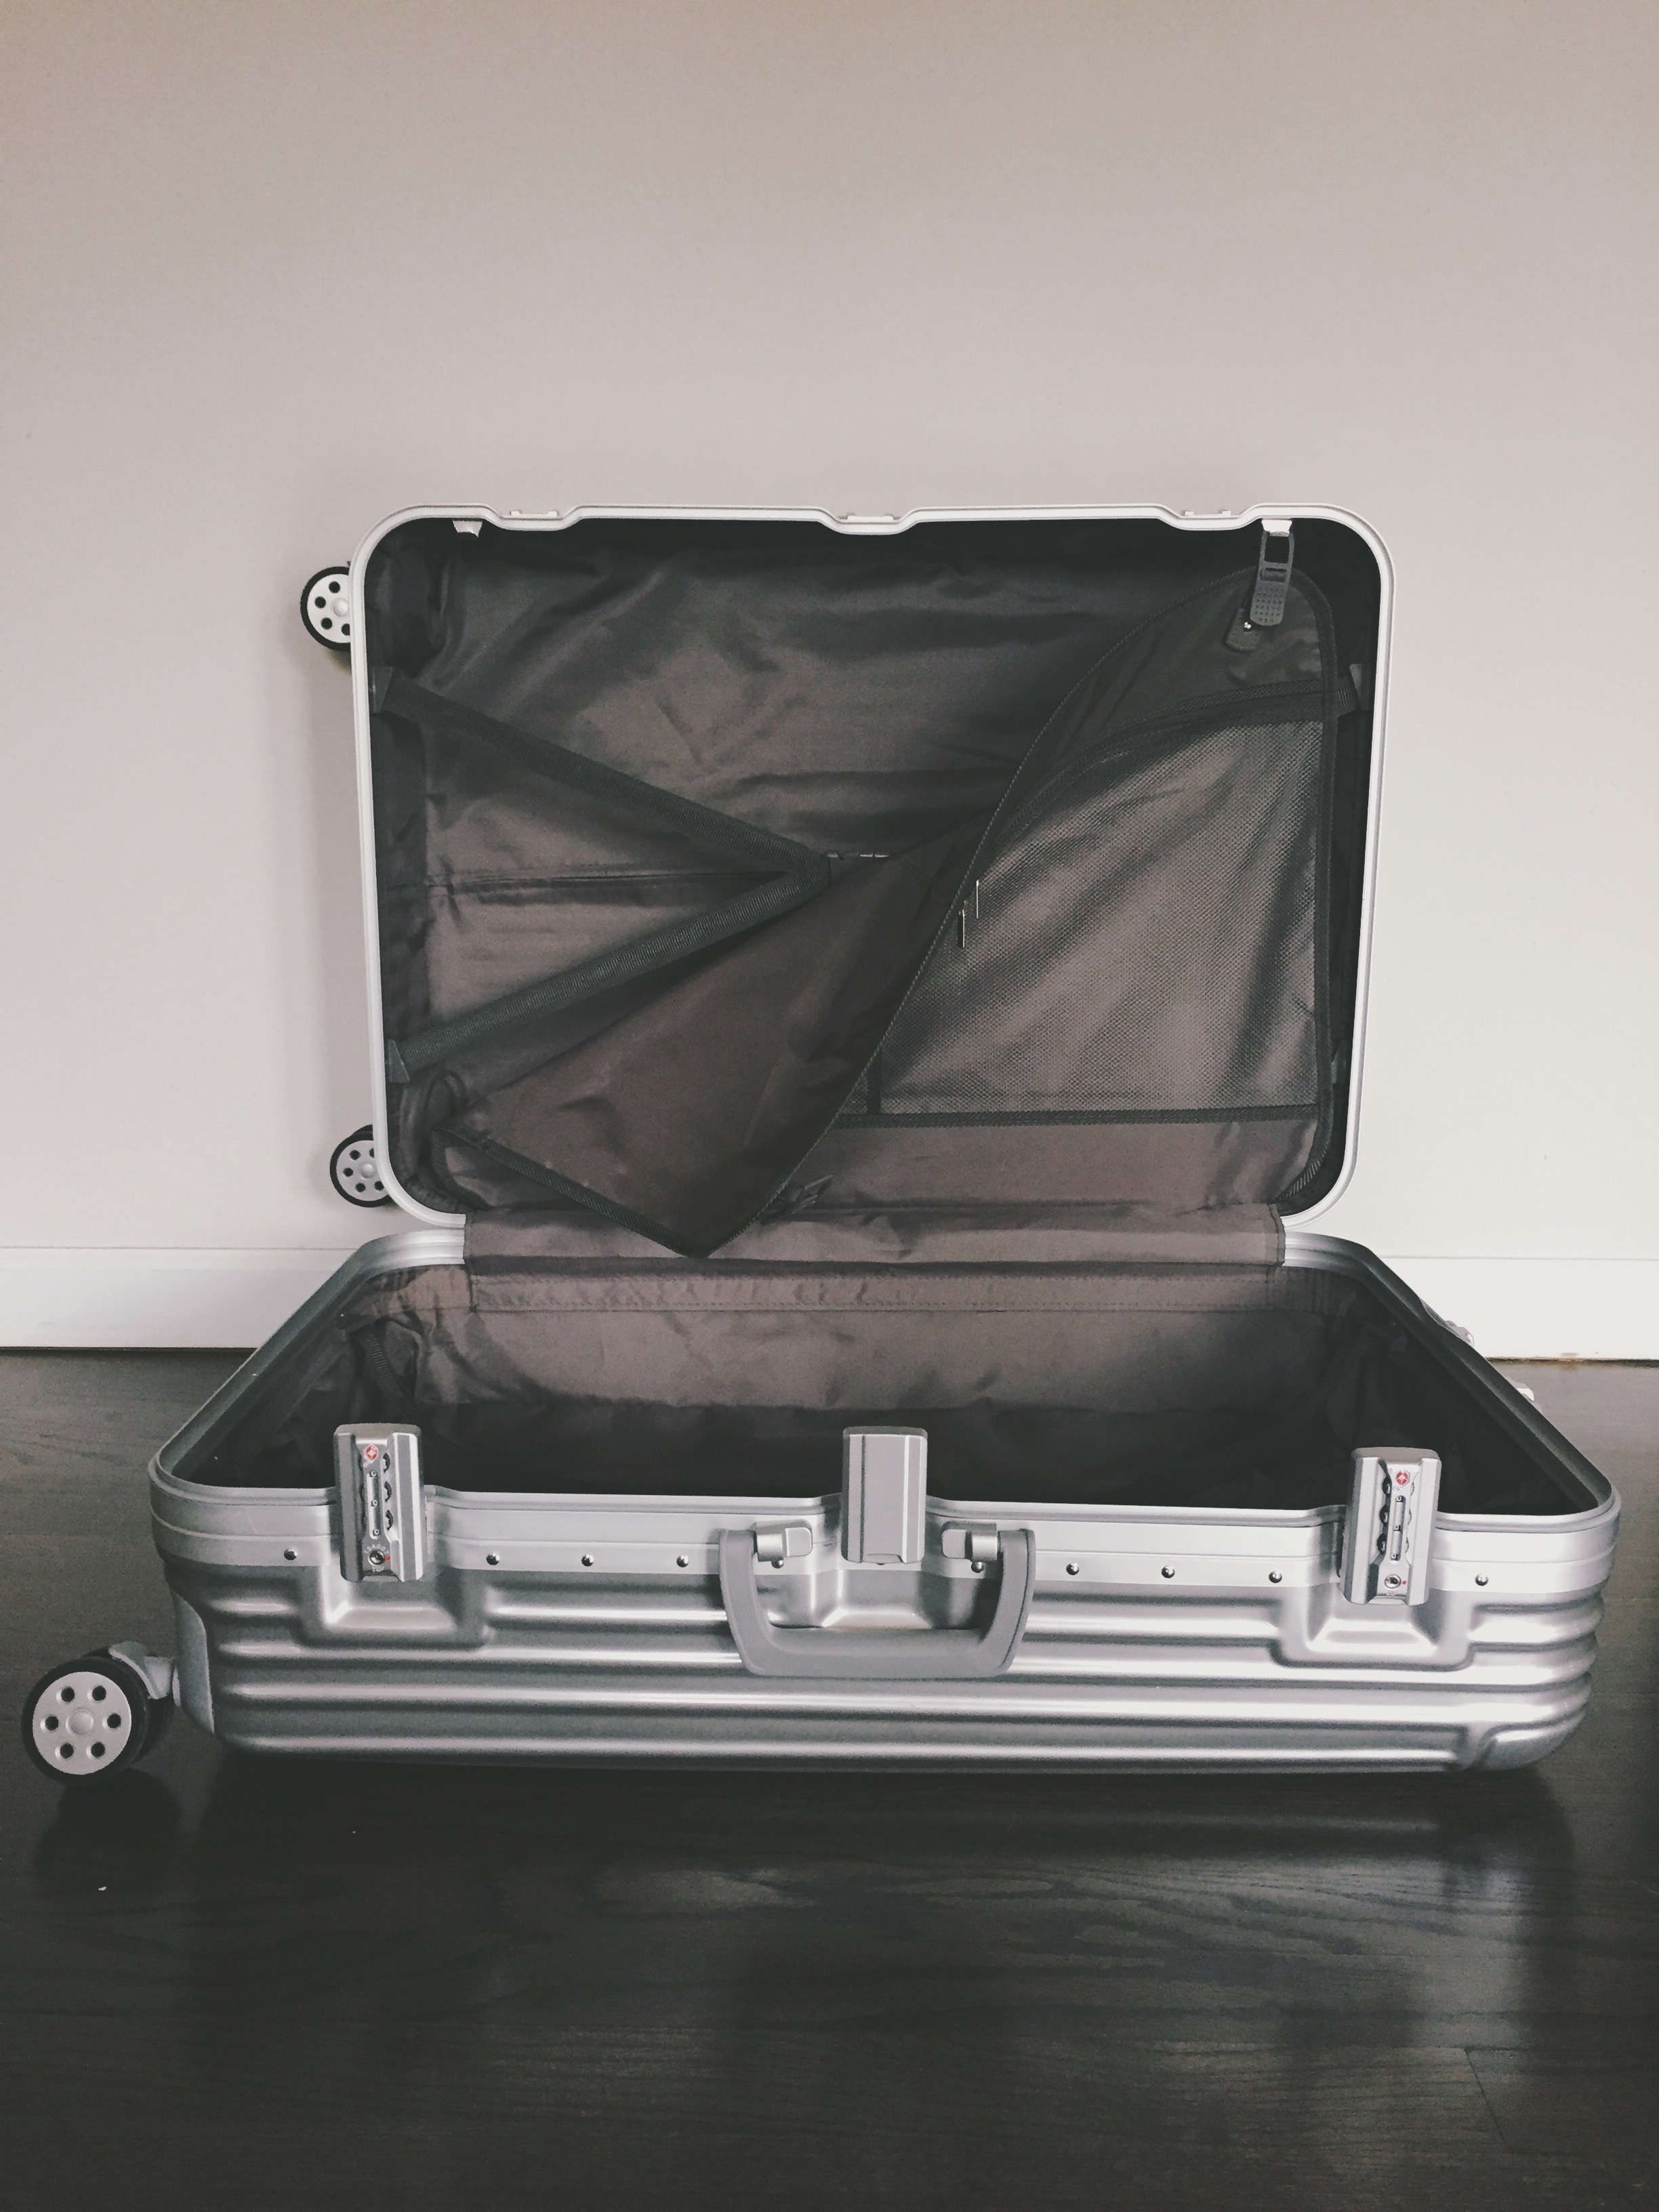 Case study: Why Rimowa rules the luggage carousel